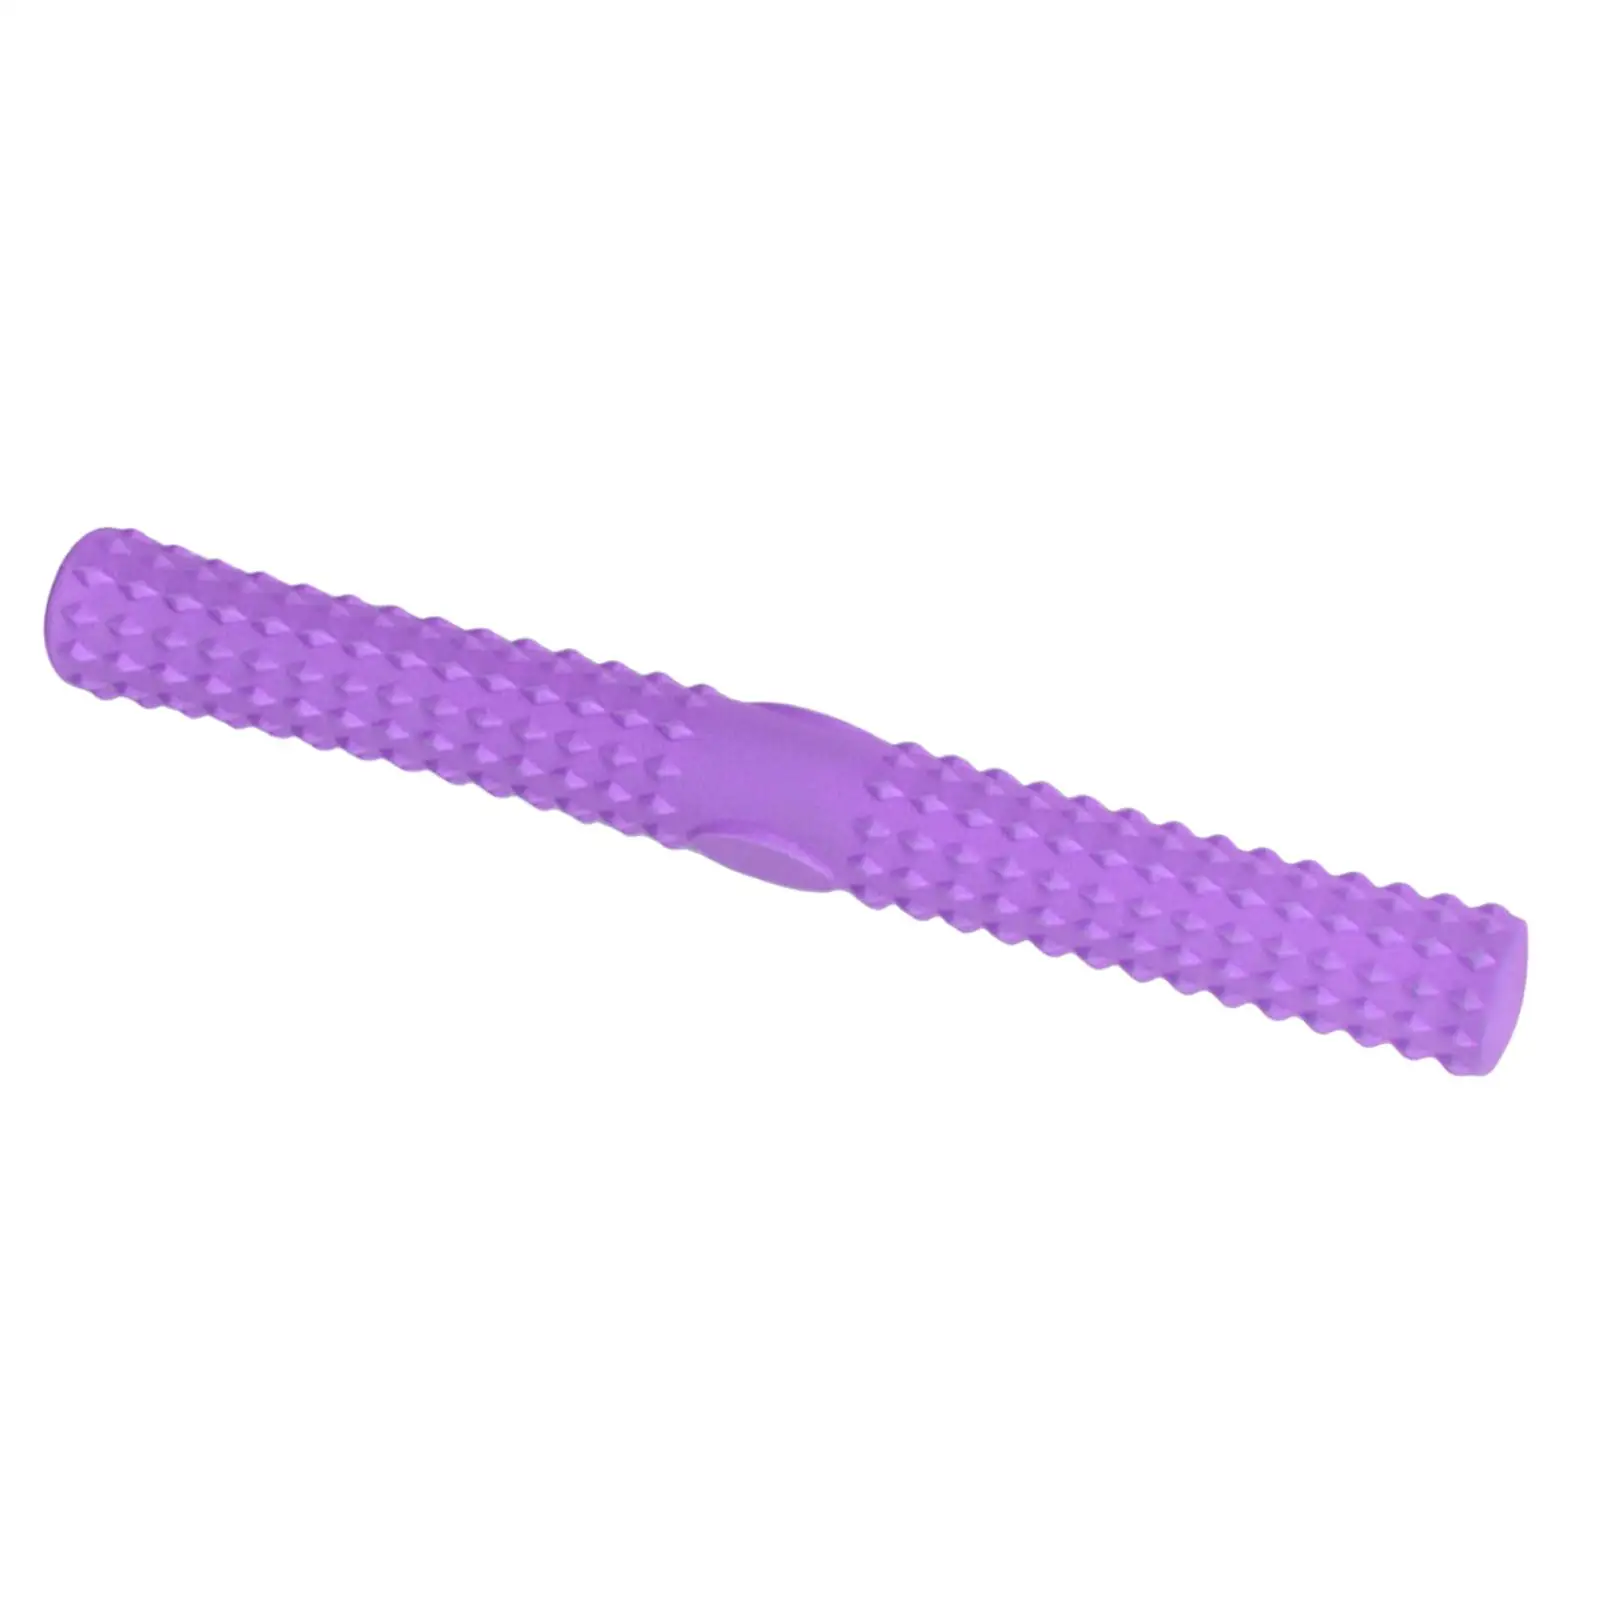 Twist Exerciser Bars Flexible Handheld Working Out Wrist Strength Body Massage Stick for Legs Full Body Shoulder Thigh Relax